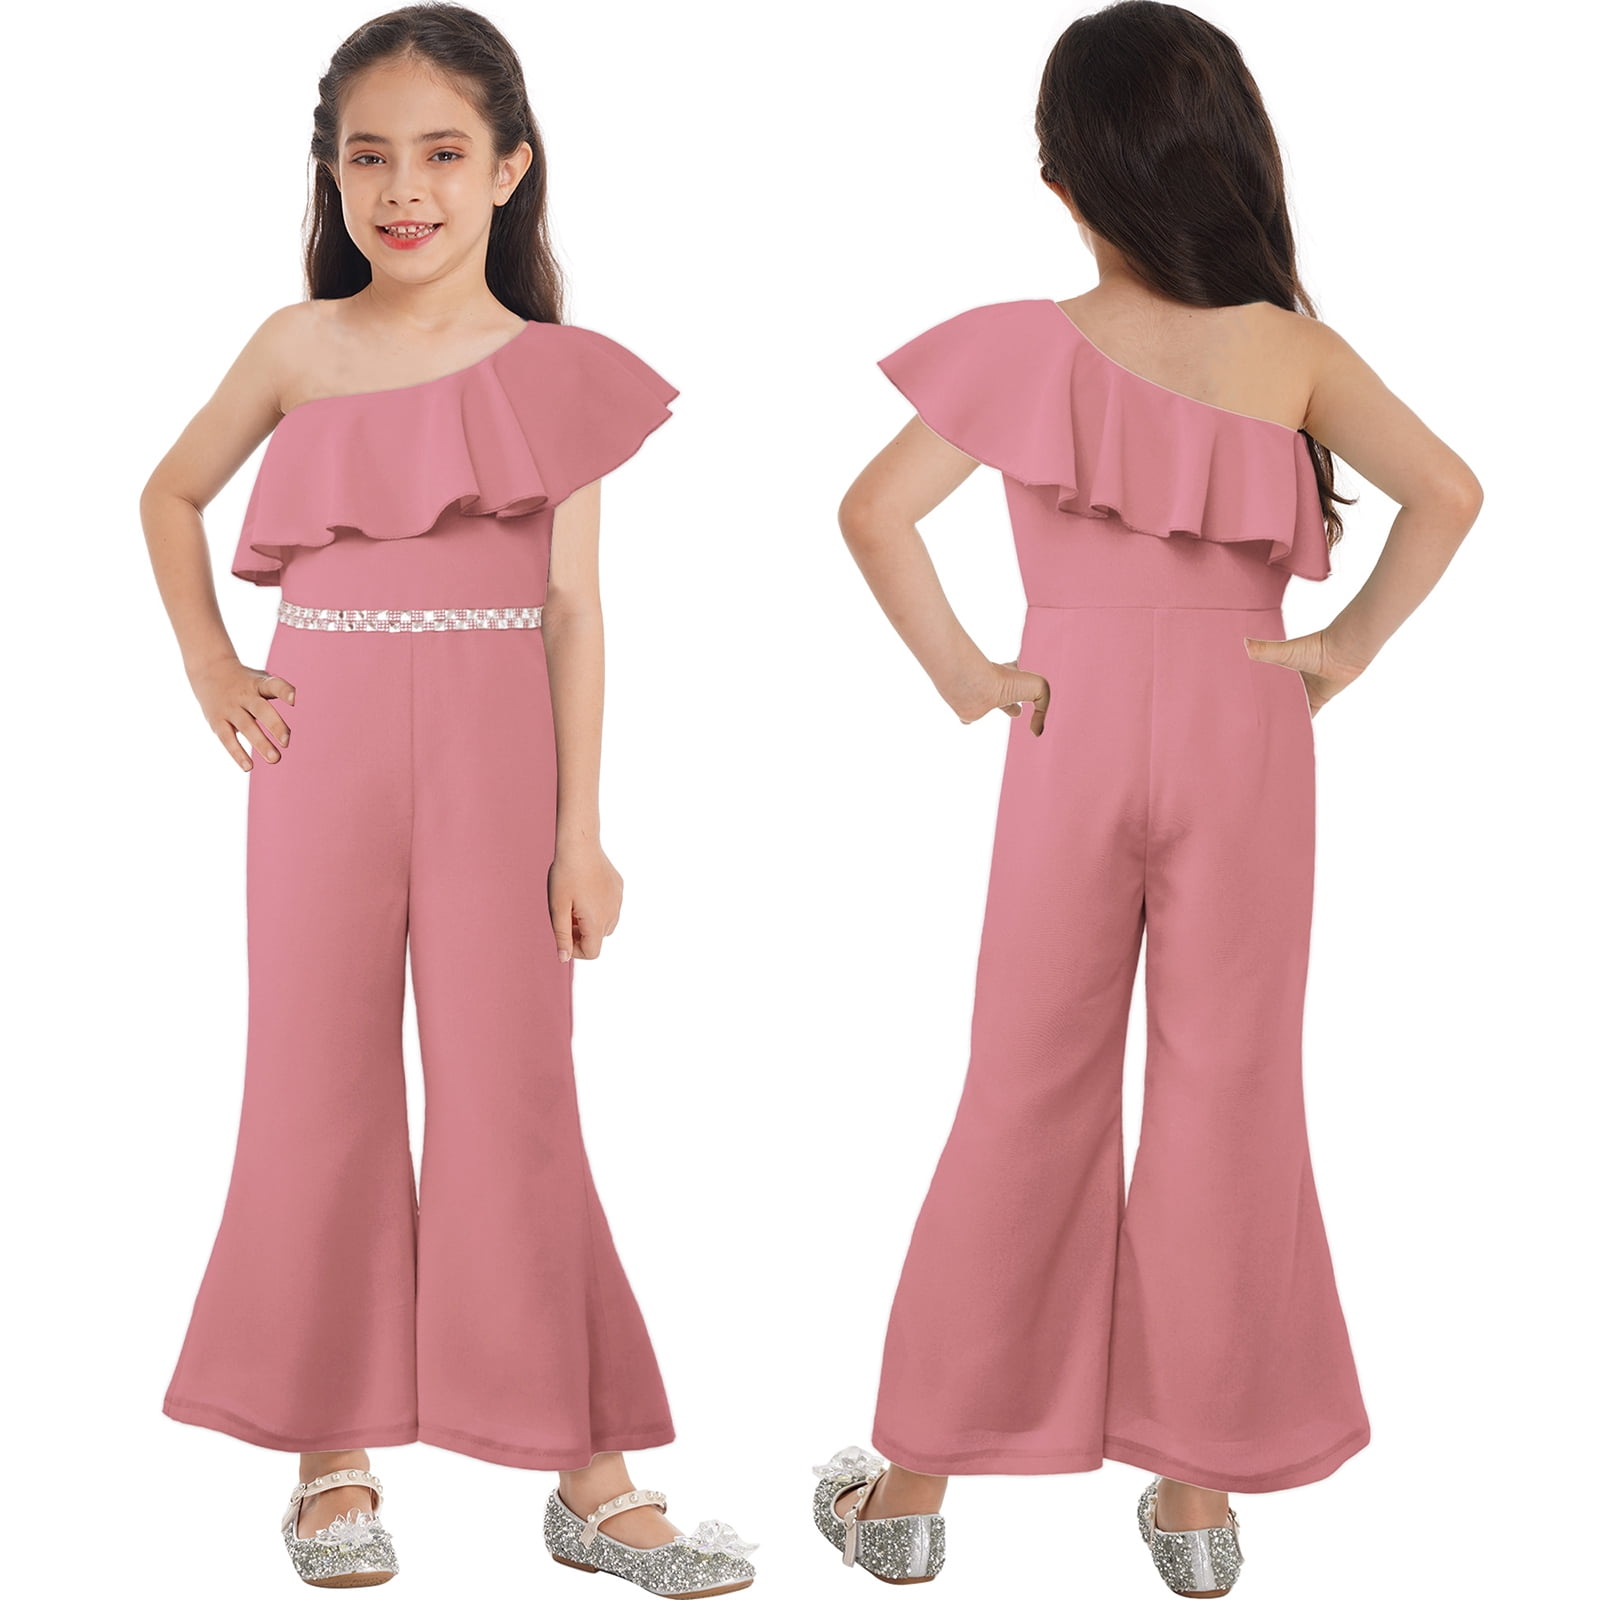 iiniim Girl s Sparkly Party Romper Dress One Shoulder Casual Flare Pants High Waisted Ruffles Jumpsuit 6 16 Dusty Pink 14 acc234ad ecfc 4fbf 8ec5 a9ba03f00d3f.a3d69a7bac3513e60637fc34cd626cde